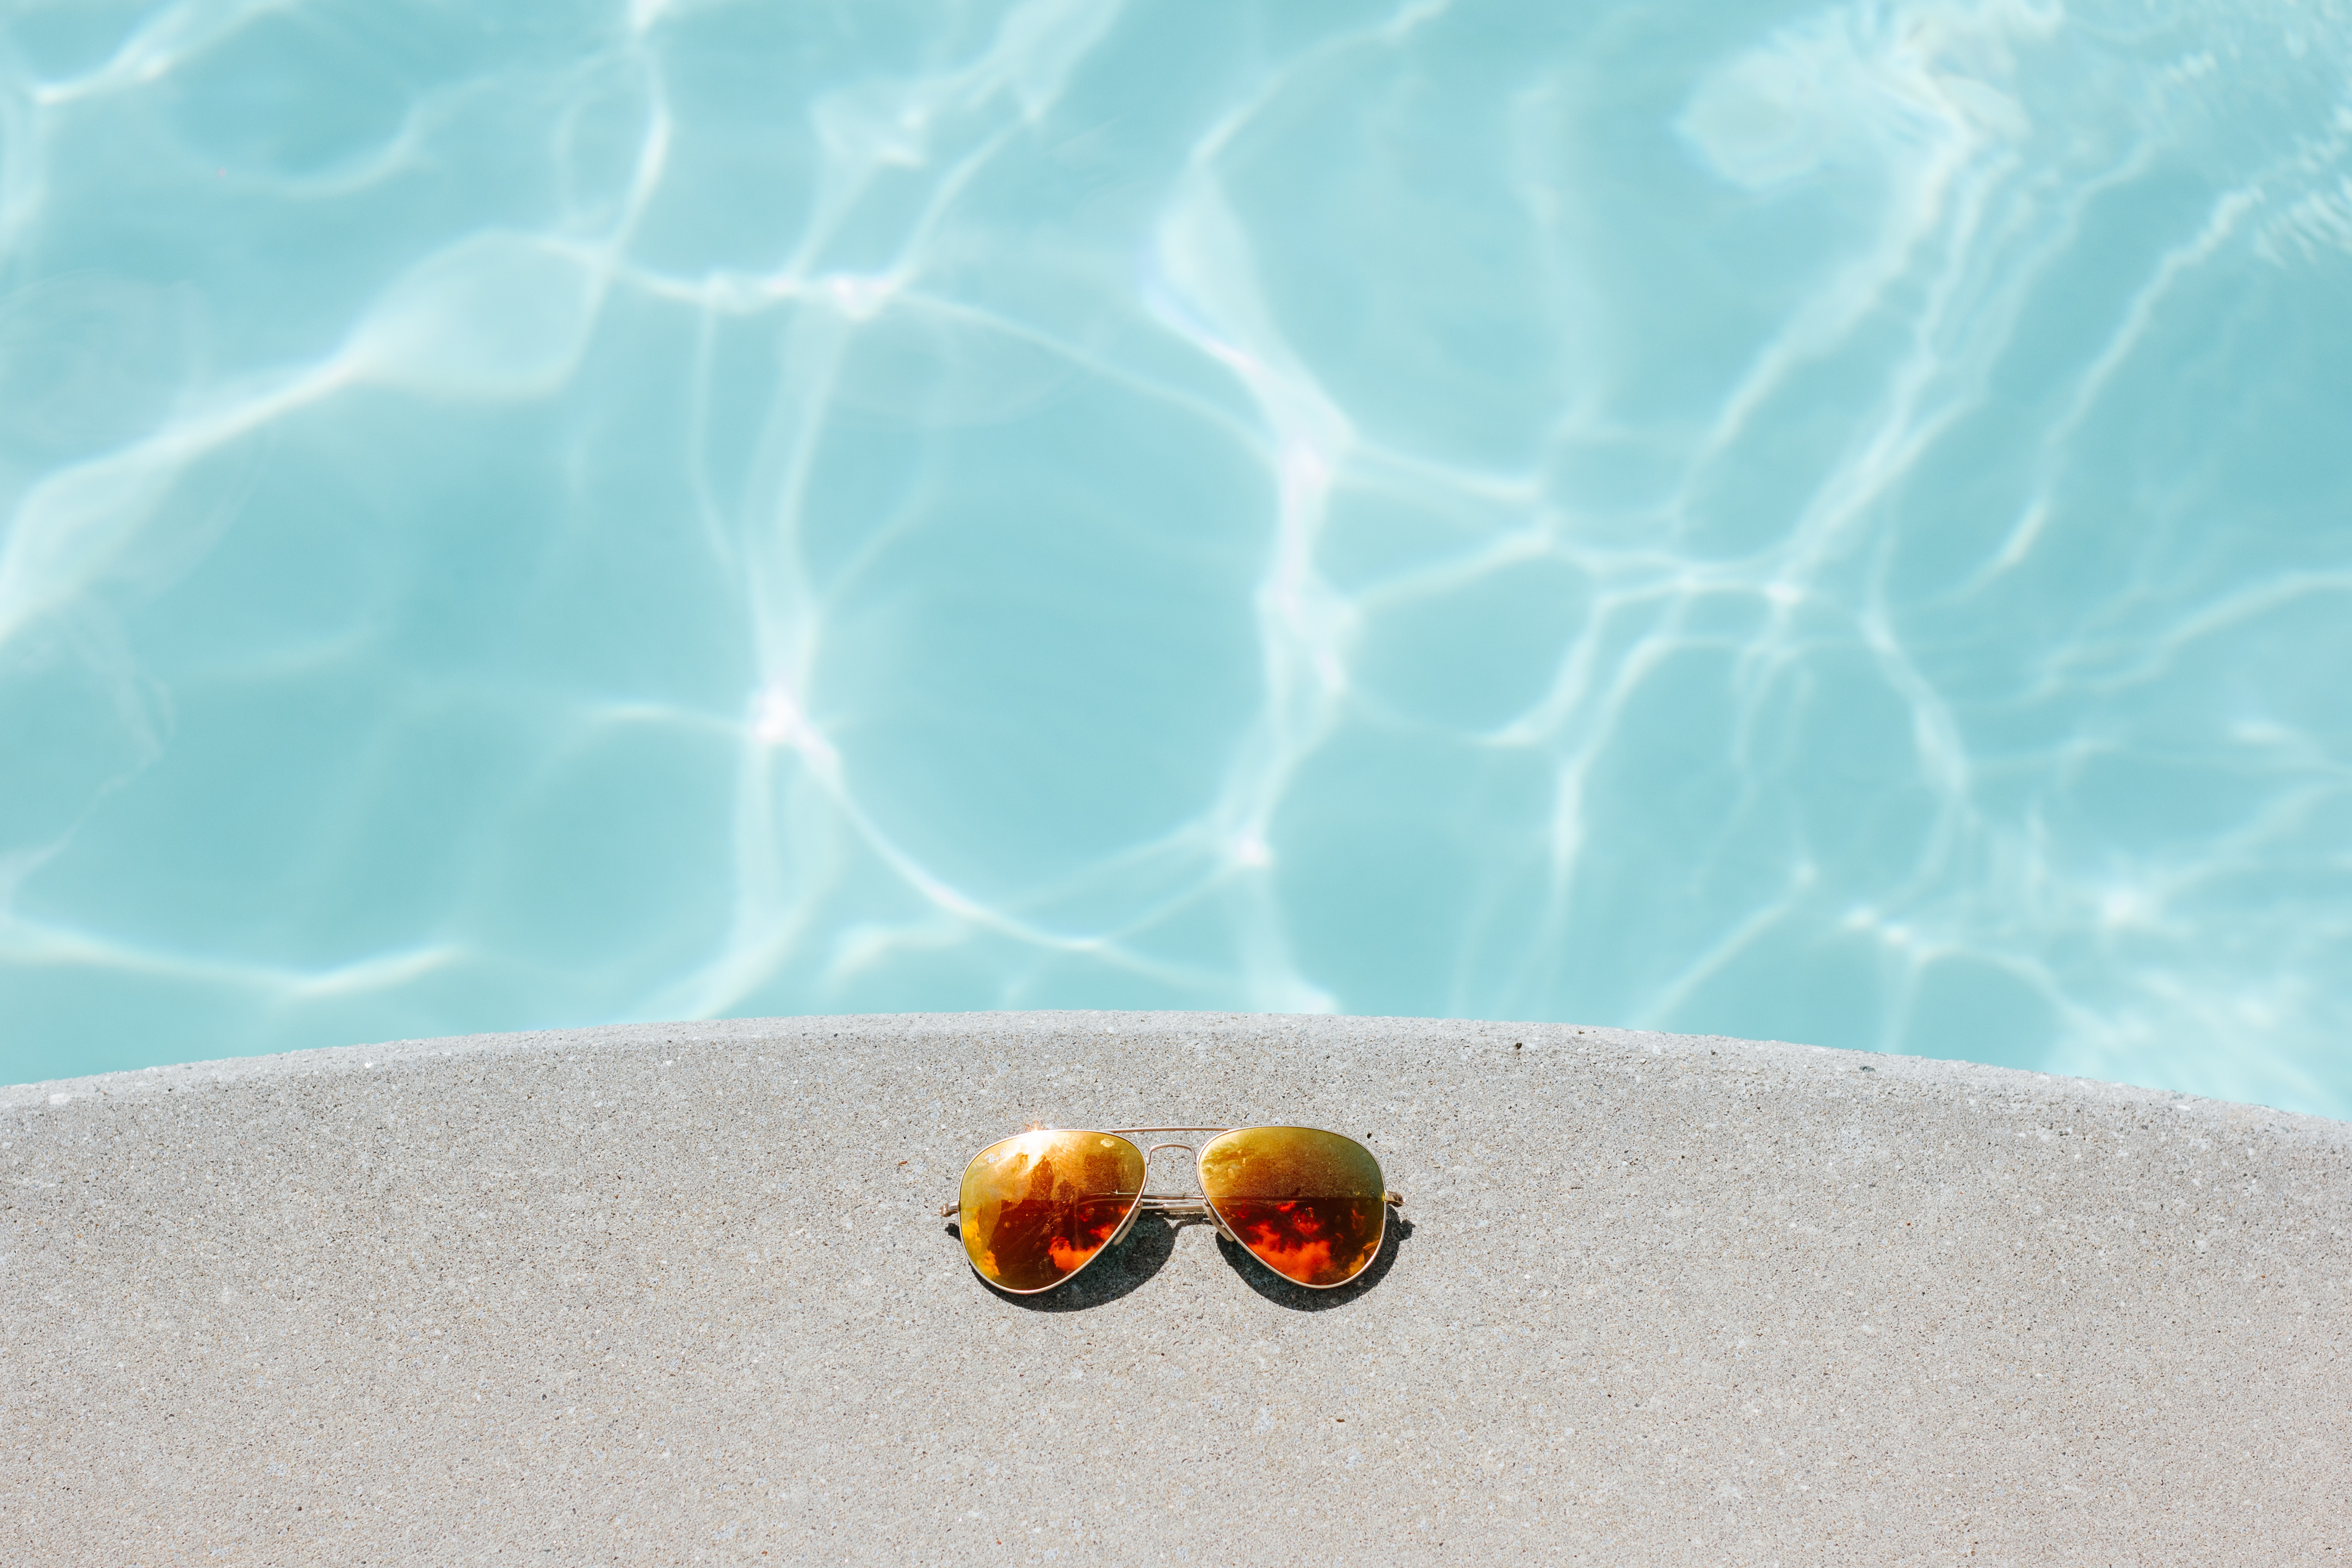 Sunglasses by pool